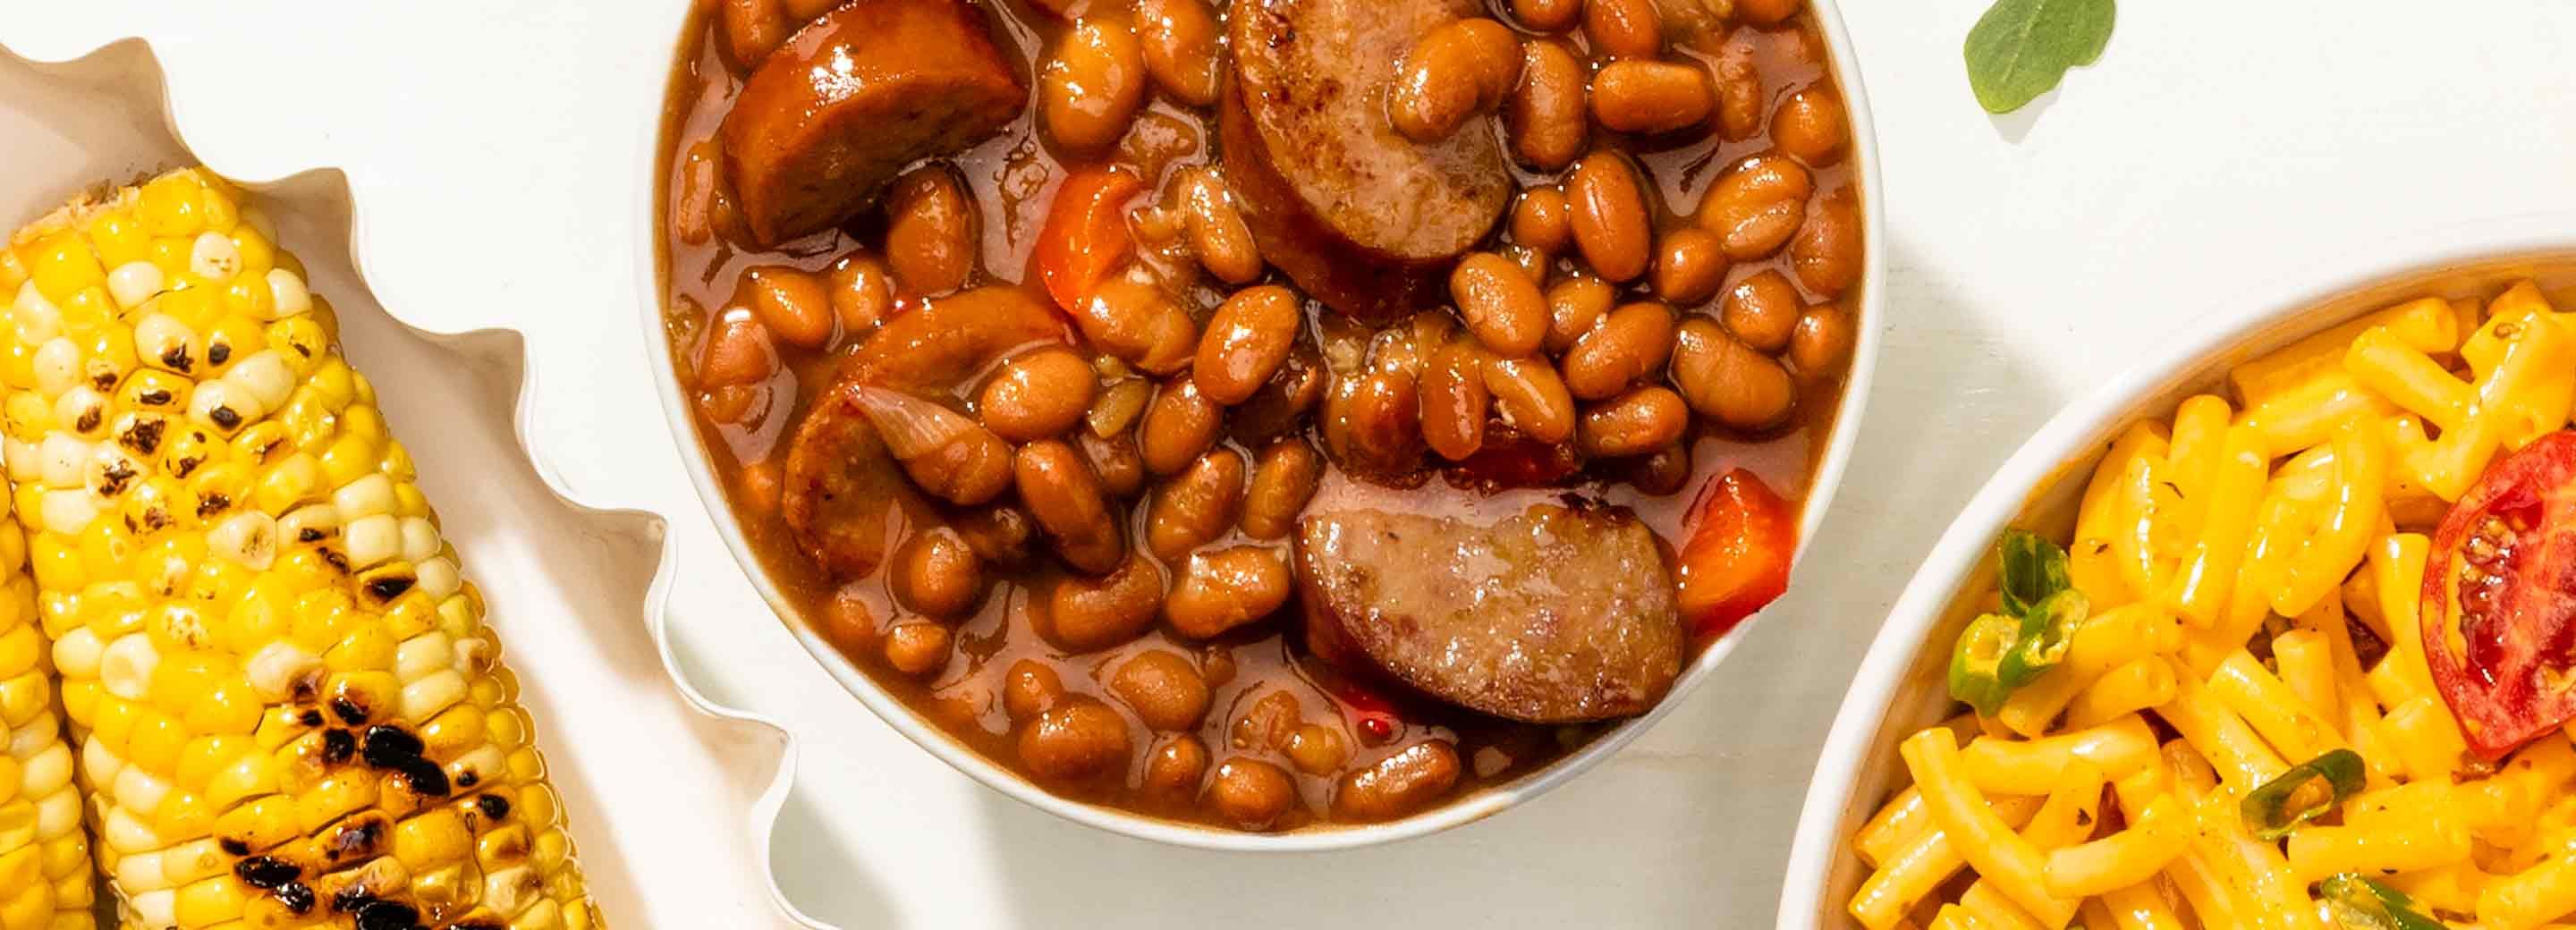 Barbecue Brats ‘n’ Beans